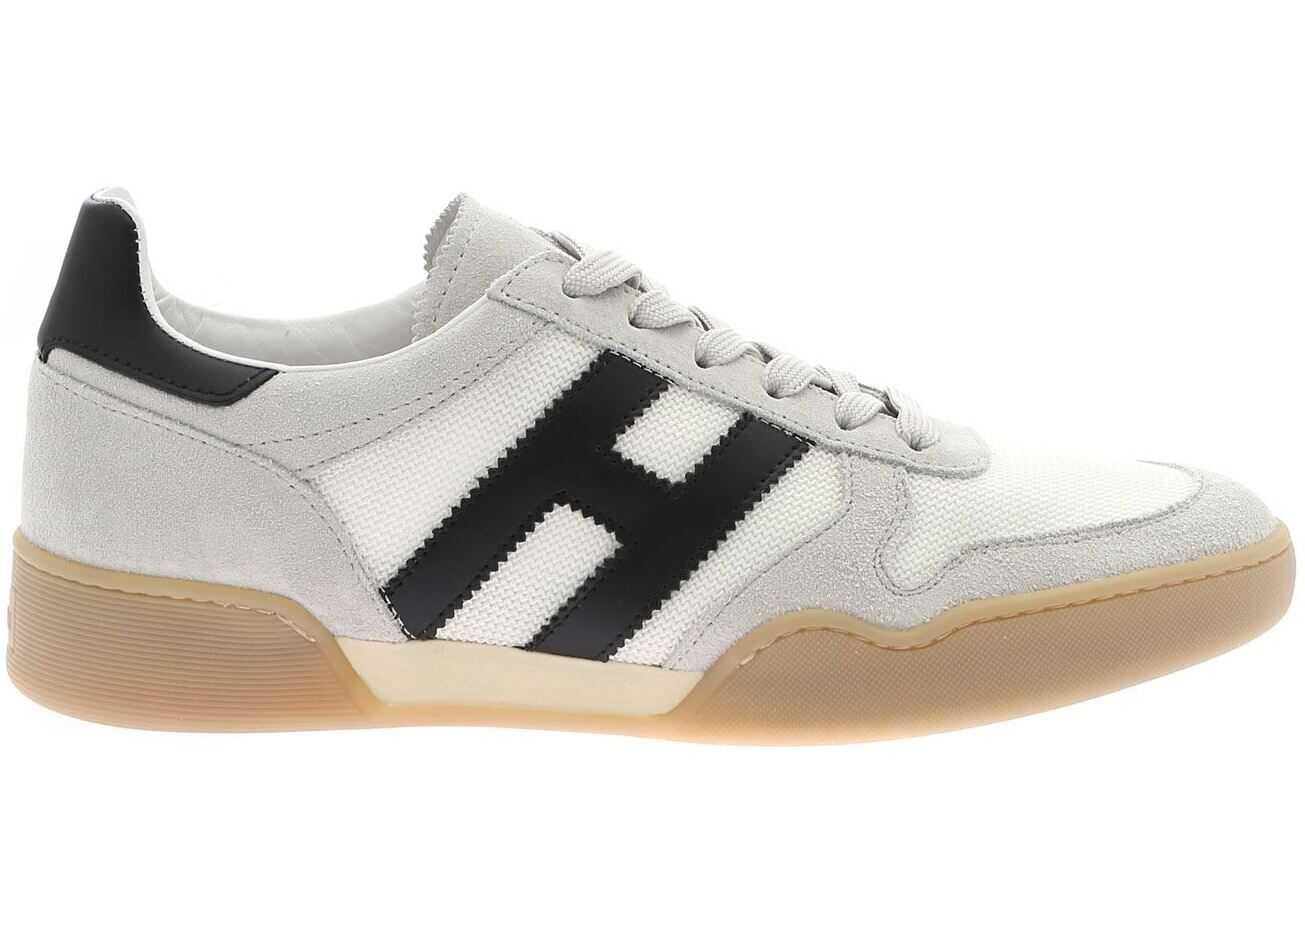 Hogan H357 Sneakers In Light Gray And White White